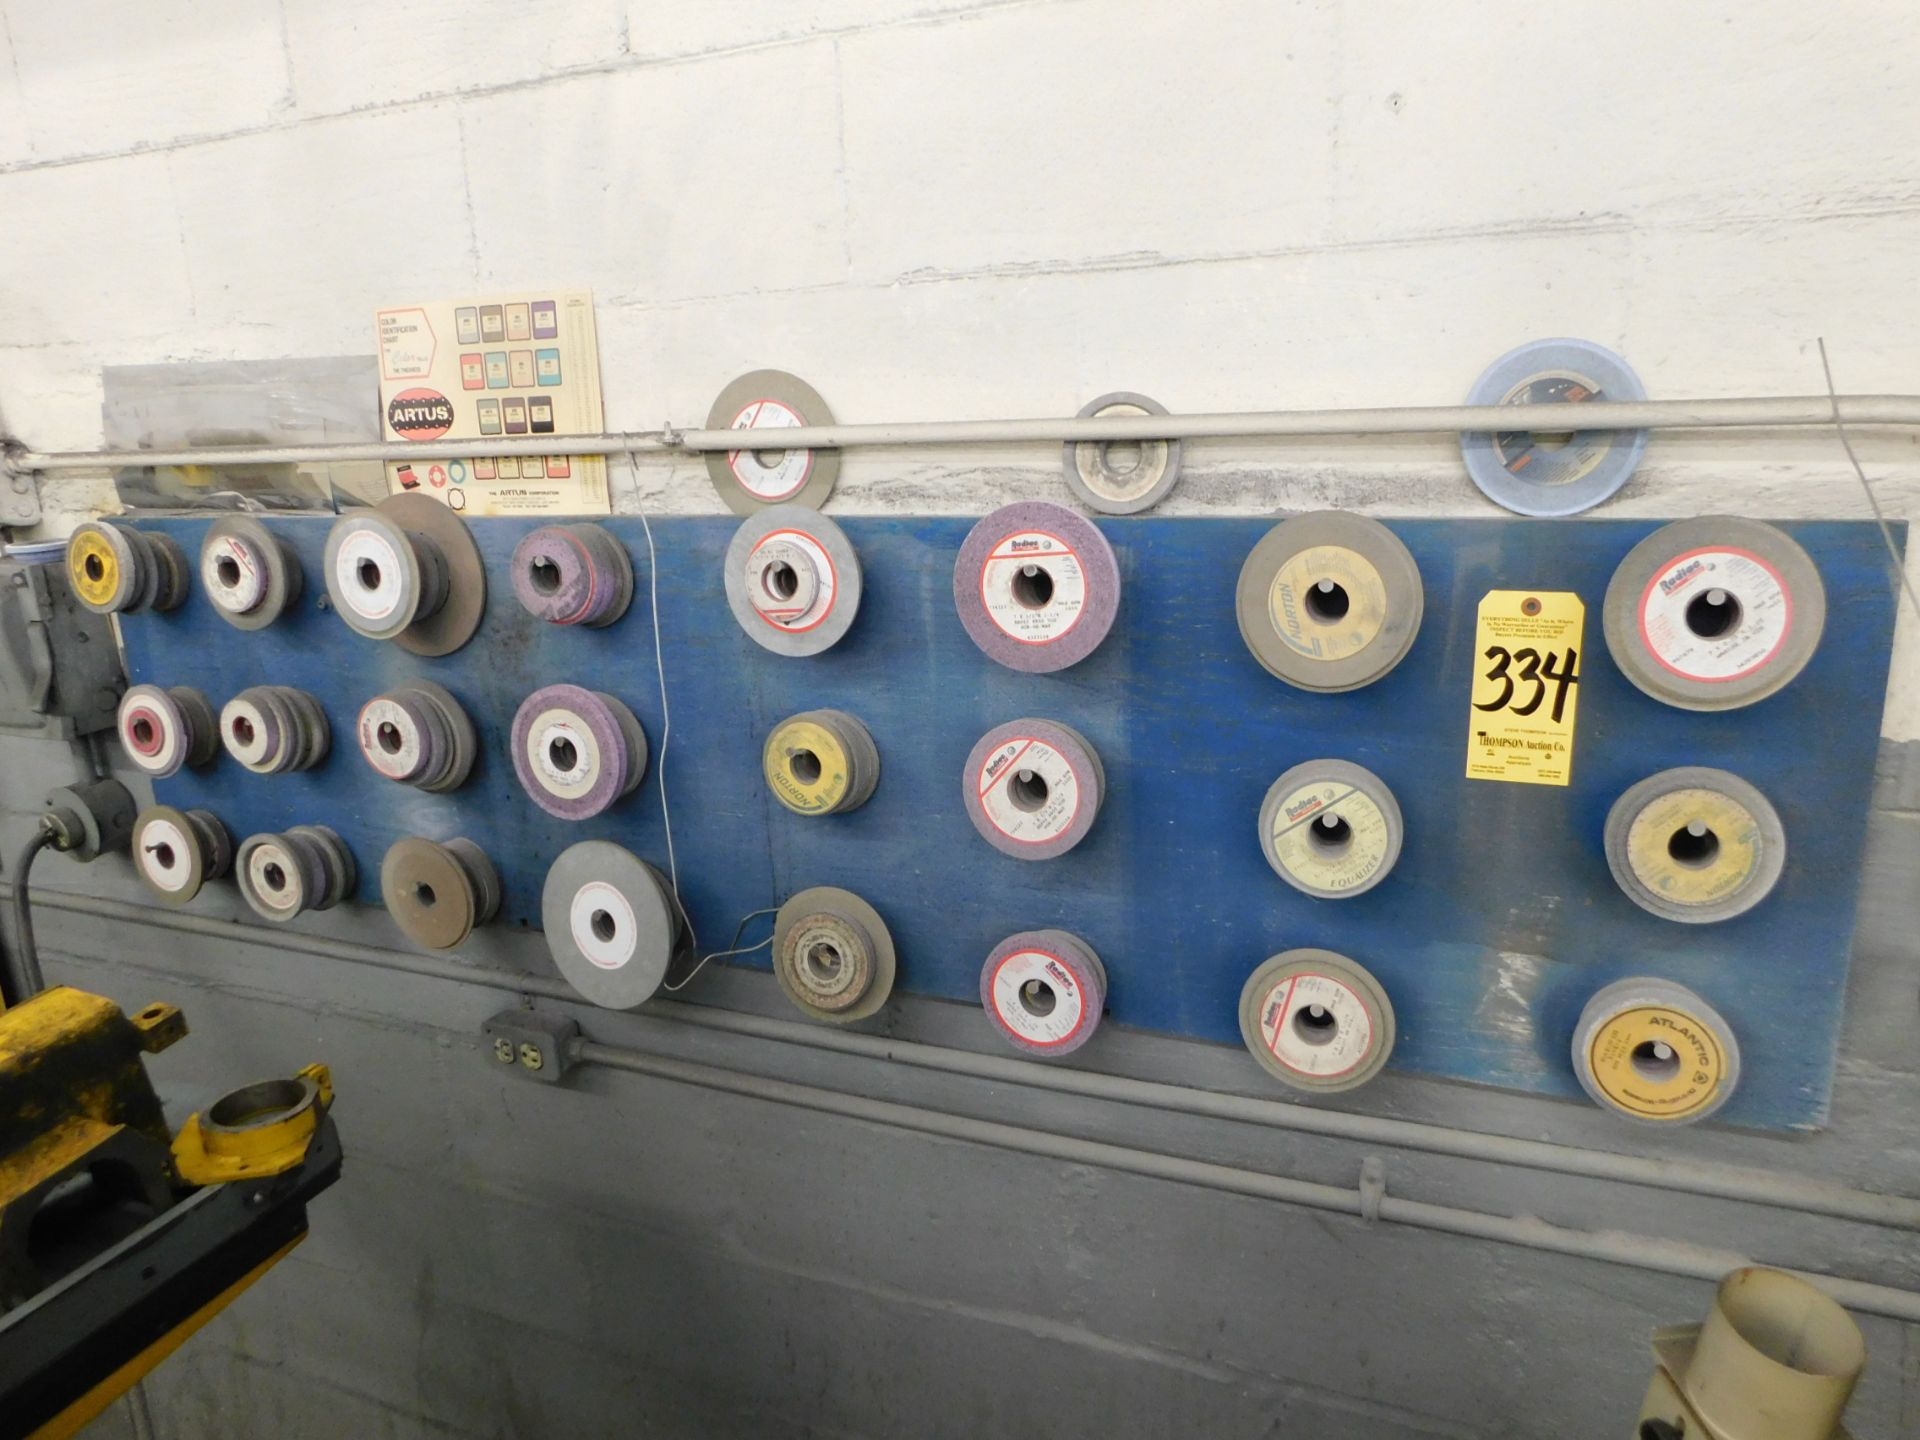 Contents of Grinding Wheels on (3) Wall Racks